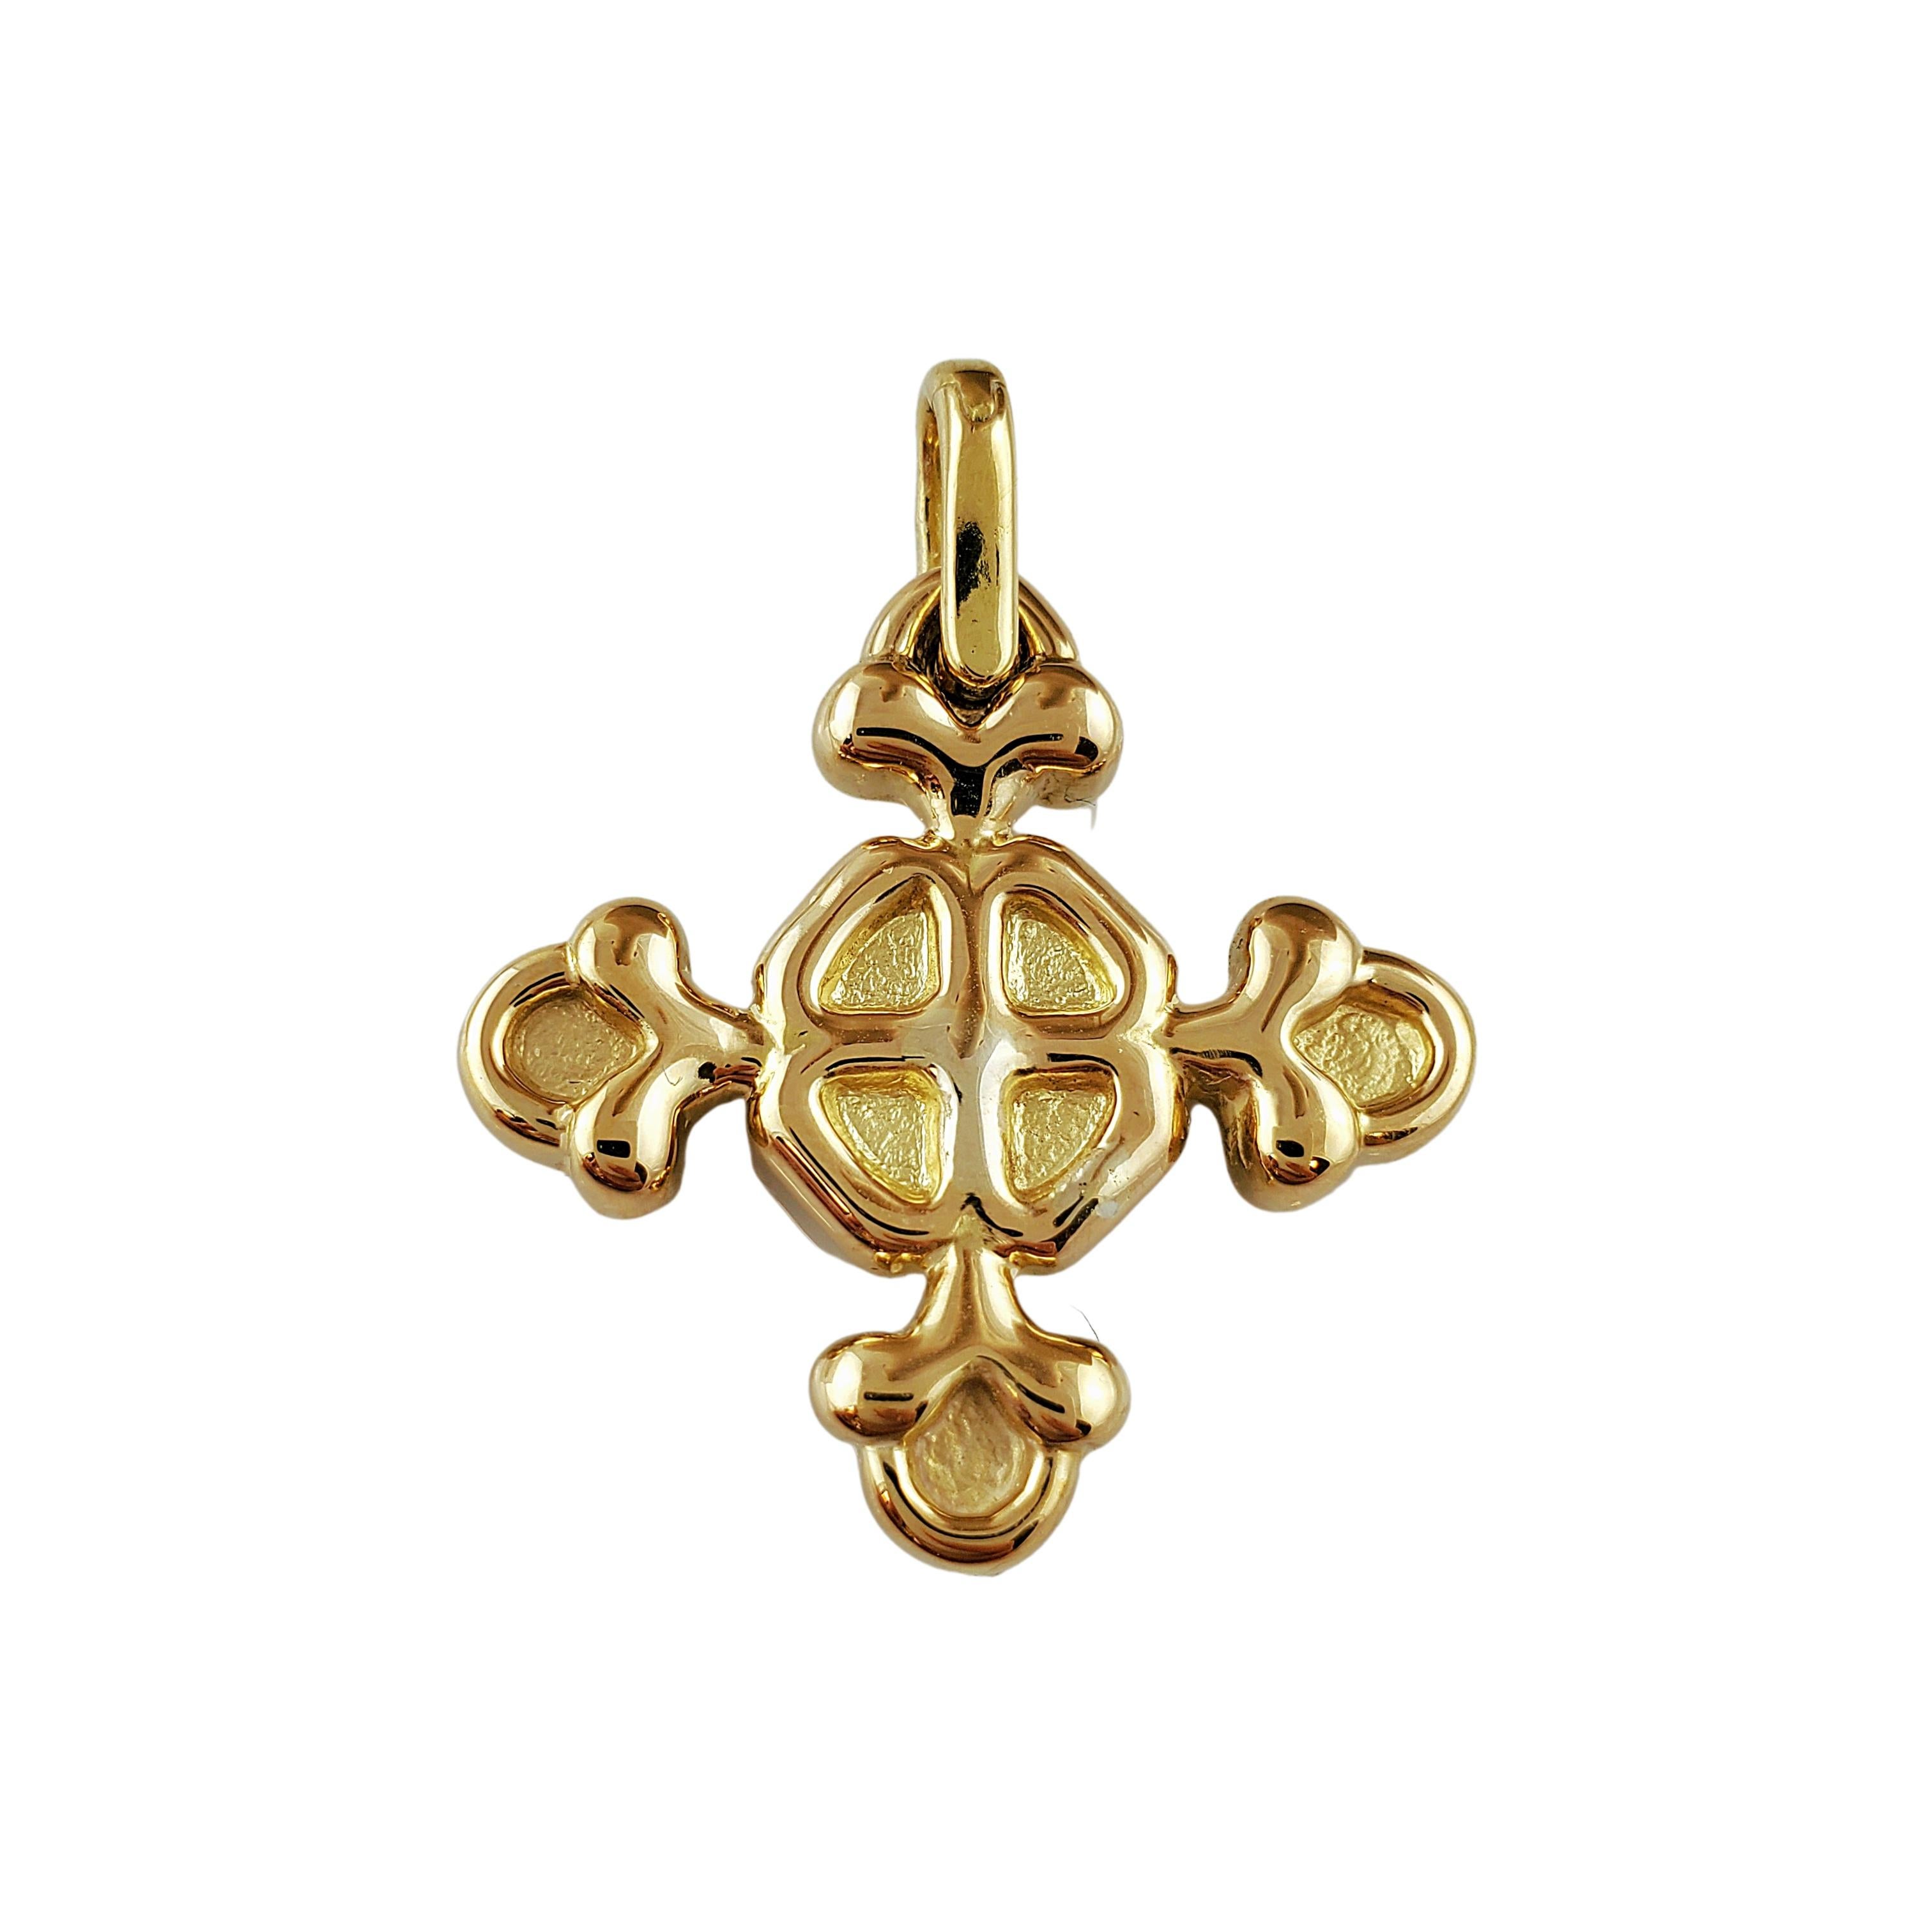 Vintage 14K Yellow Gold Cross Pendant

Beautiful 14k yellow gold cross pendant can be a representation of faith, hope, forgiveness, and religion. Crosses hold many different meanings which makes this a universal gift option. (Chain not